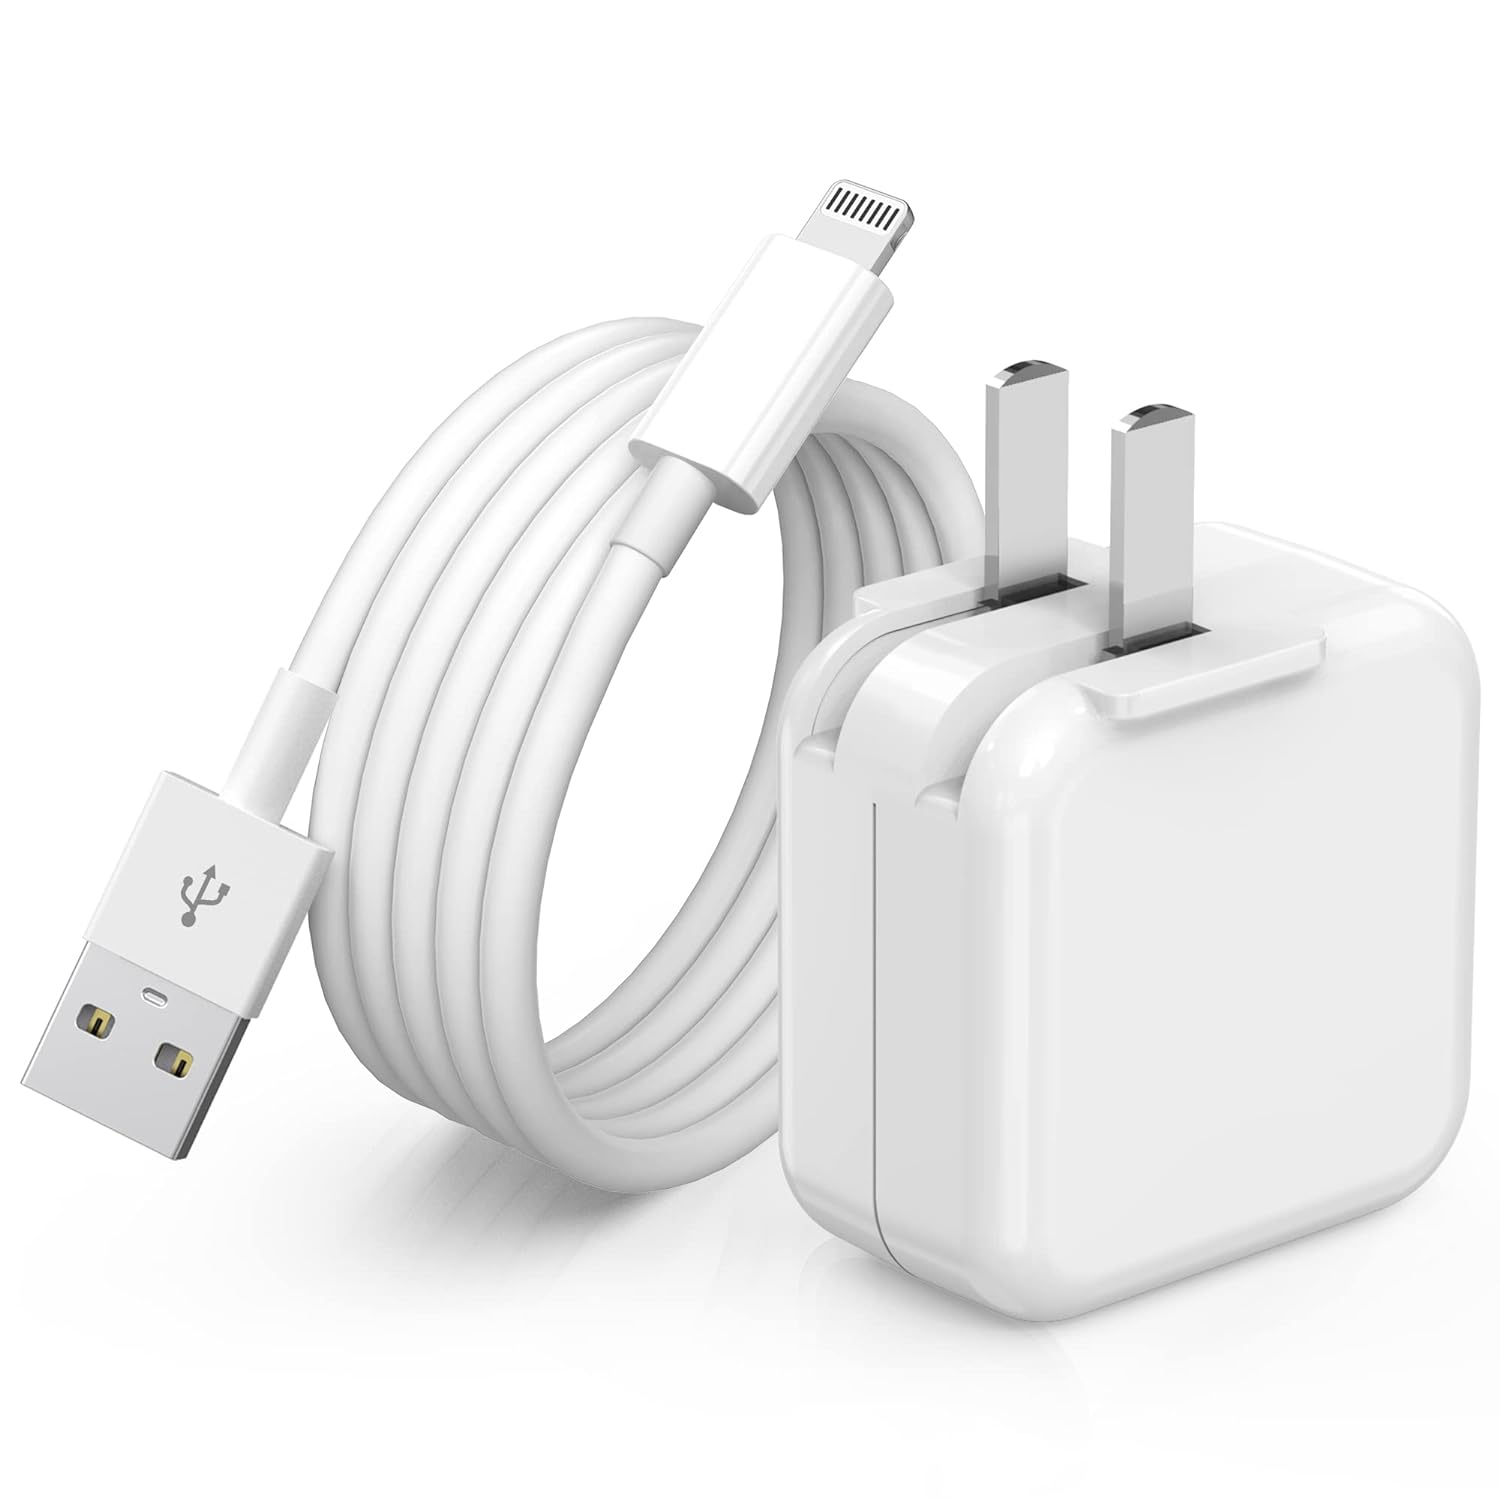 iPad charging cable and power button